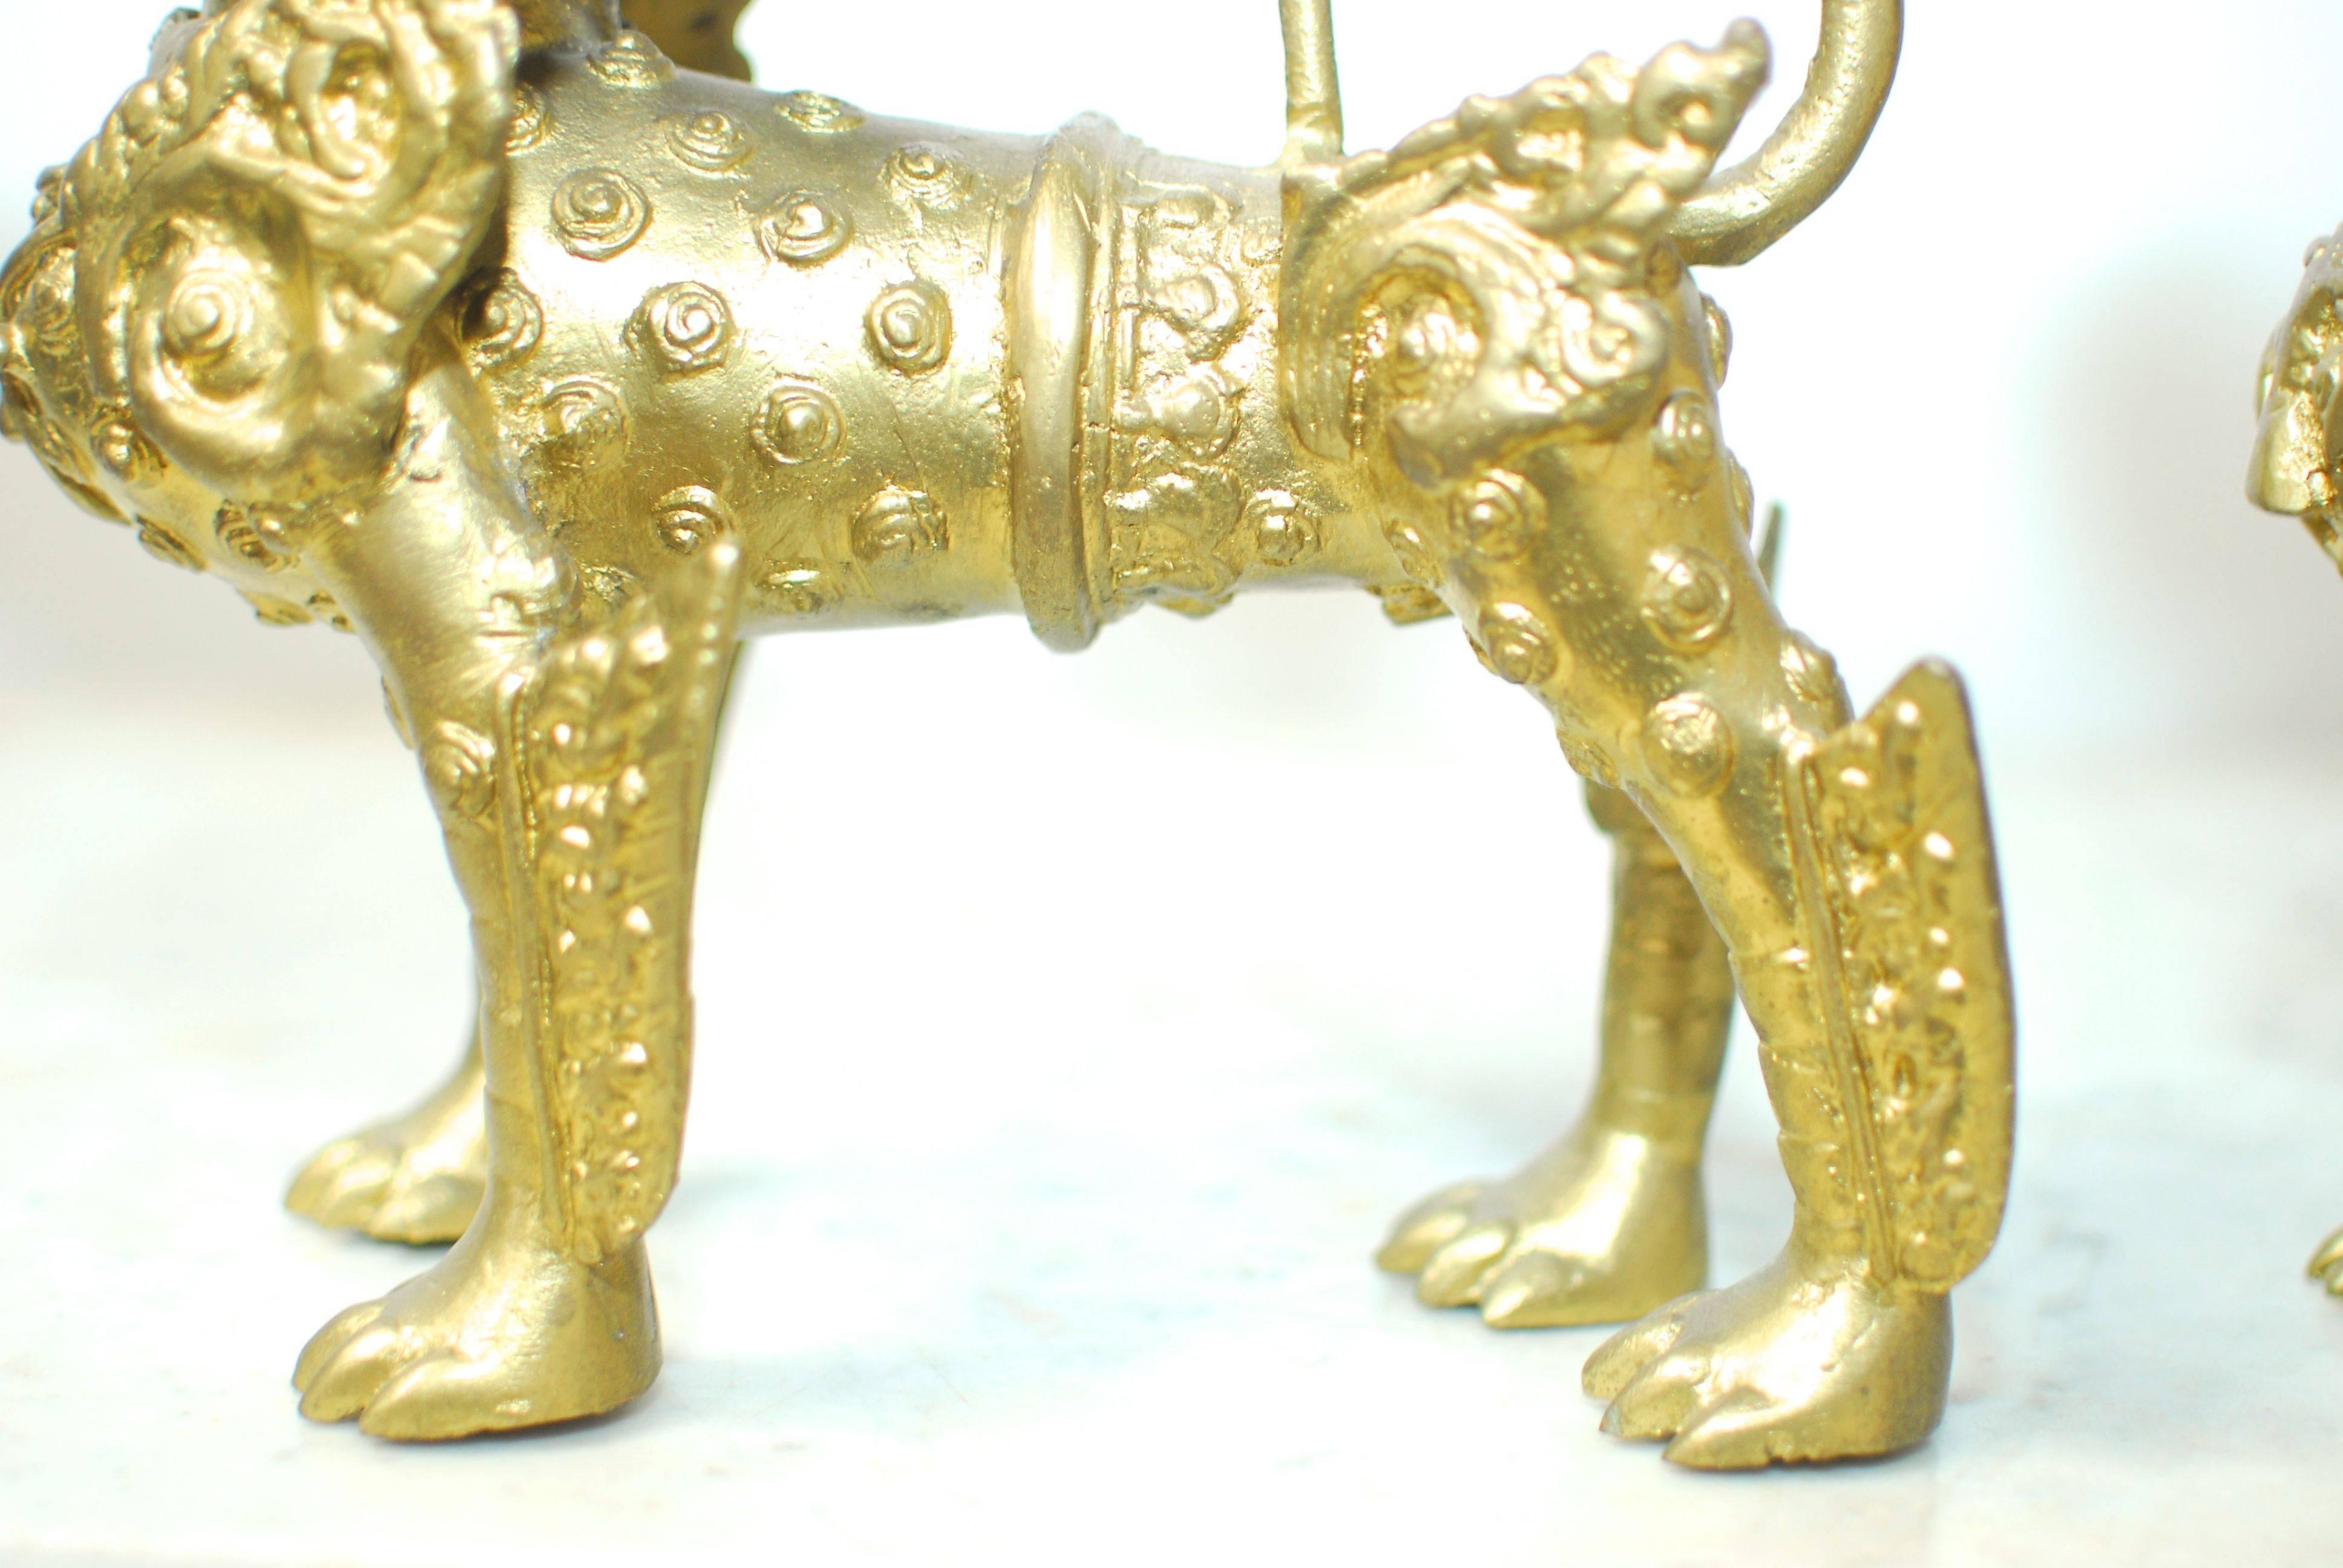 Hand-Crafted Pair of Southeast Asian Brass Foo Dogs with Gilt Finish